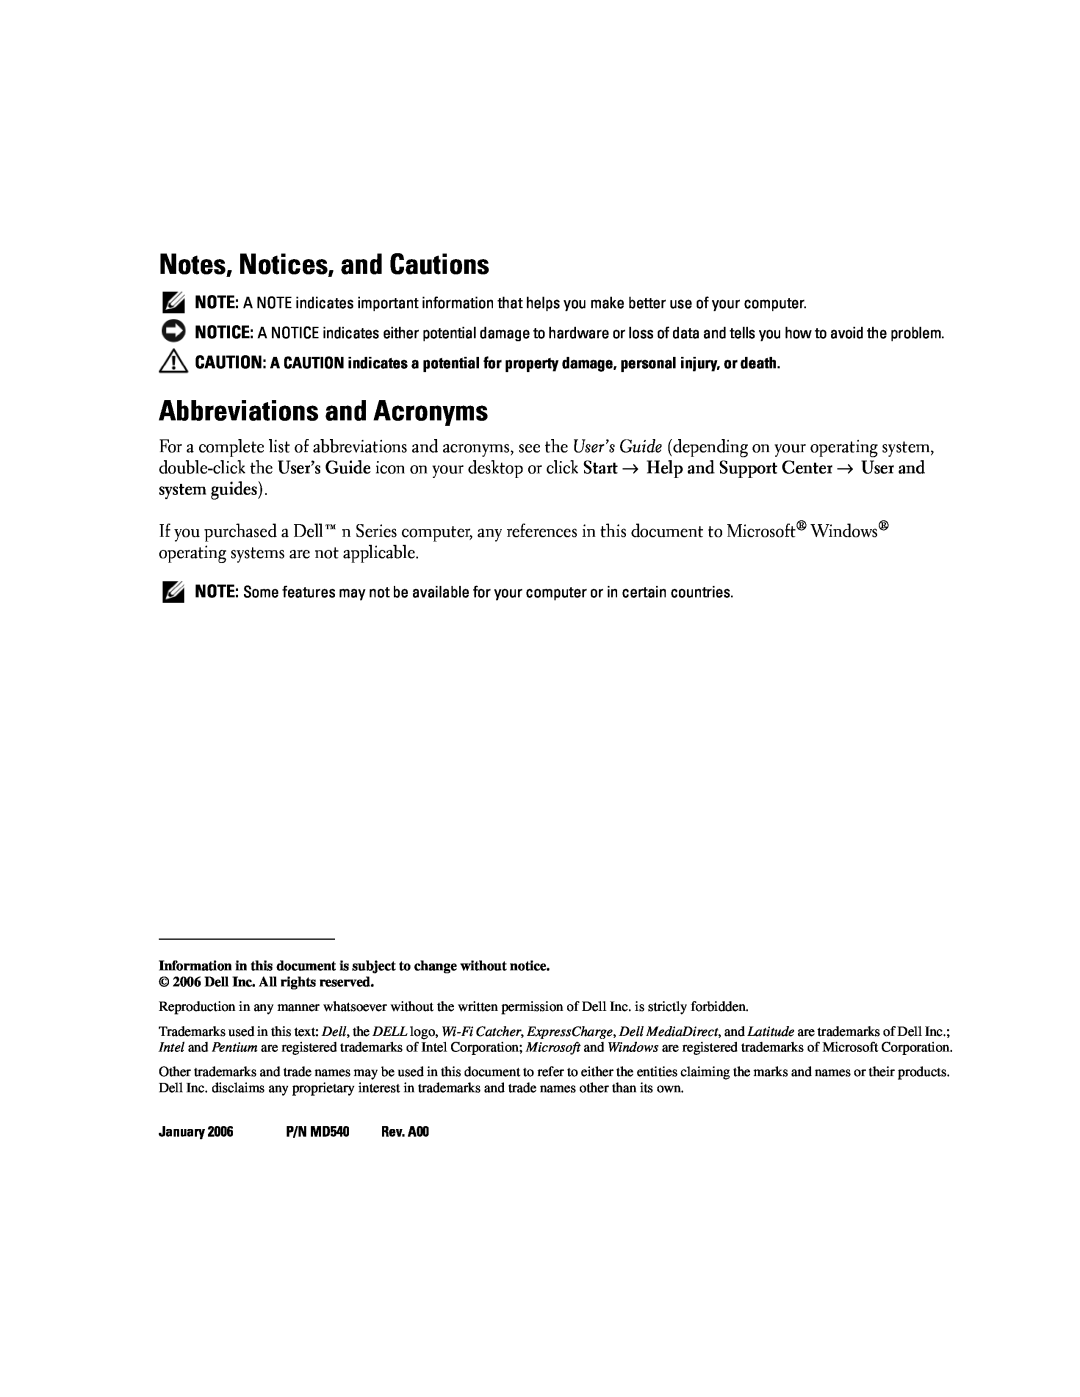 Dell D620 manual Notes, Notices, and Cautions, Abbreviations and Acronyms, January, P/N MD540 